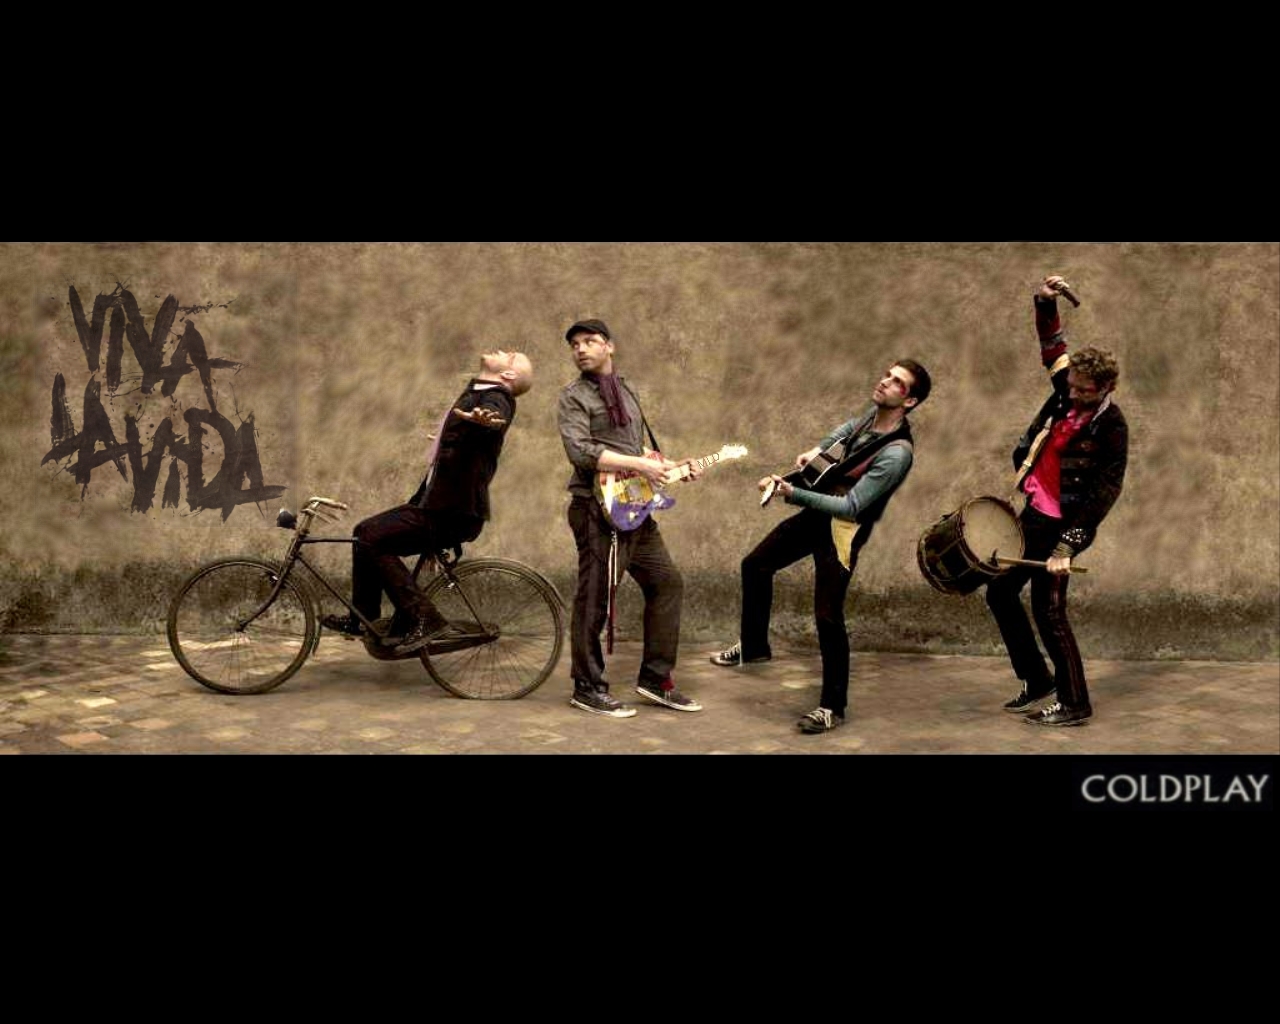 Coldplay Image HD Wallpaper And Background